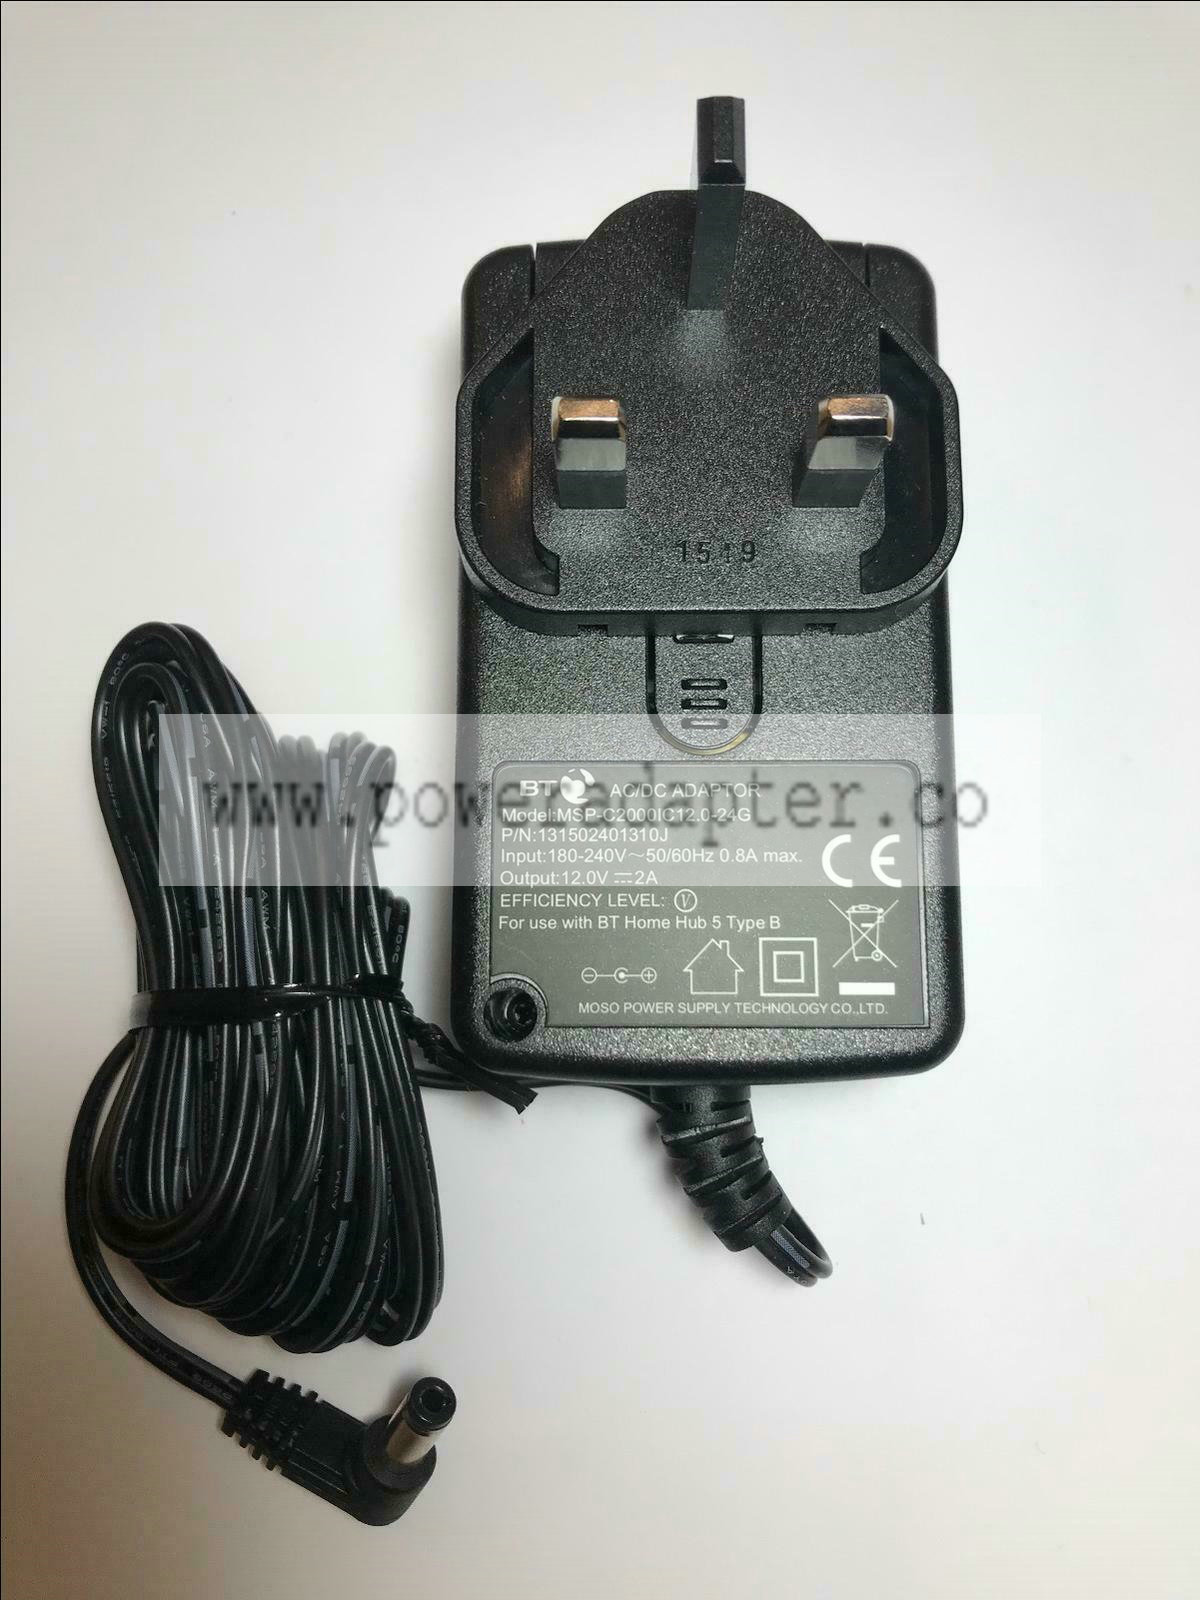 LACIE EXTERNAL HARD DRIVE HD AC-DC Switching Adapter Brand: DIXIETREE Output Current: 2A MPN: O4-12VCDM-928! Manufa